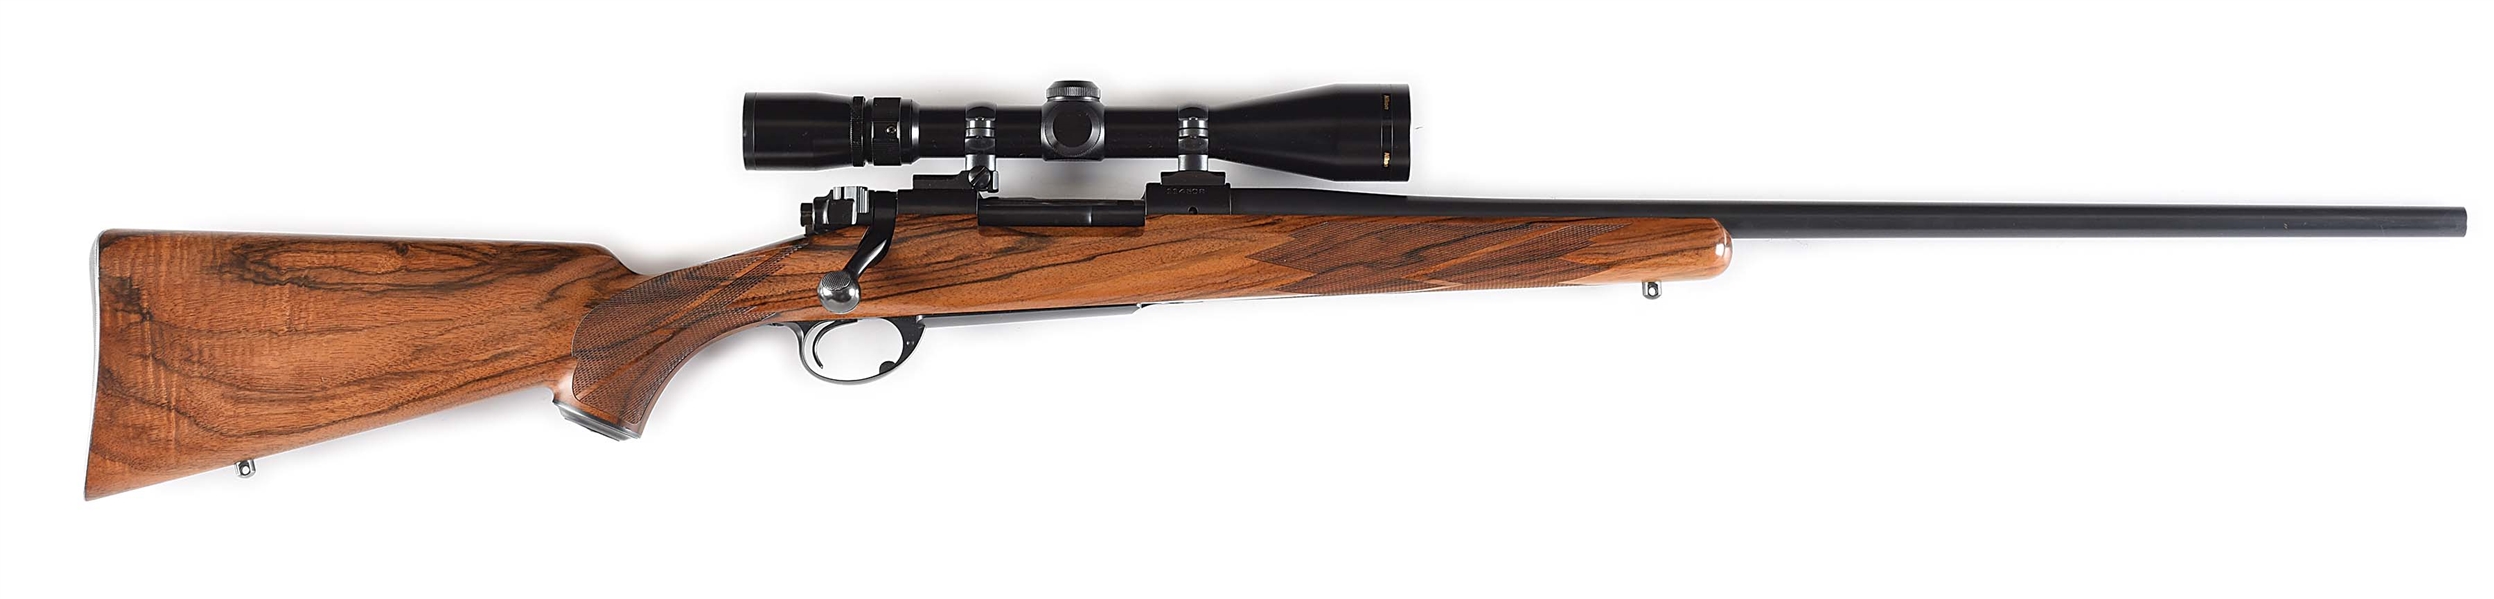 (C) H. L. (PETE) GRISEL CUSTOM PRE-64 WINCHESTER MODEL 70 BOLT ACTION RIFLE WITH SCOPE.